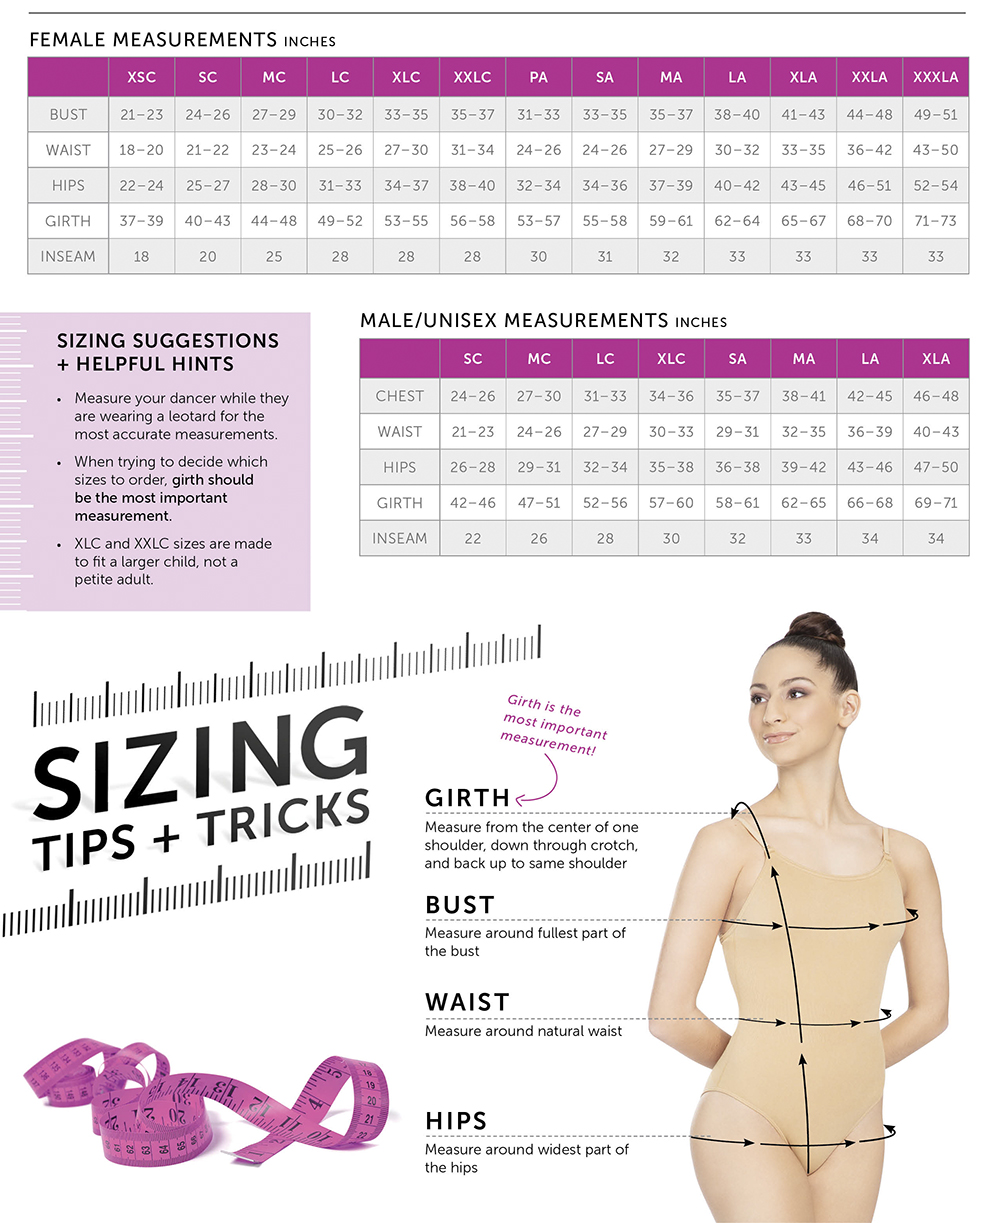 Costume sizing charts and measuring tips.